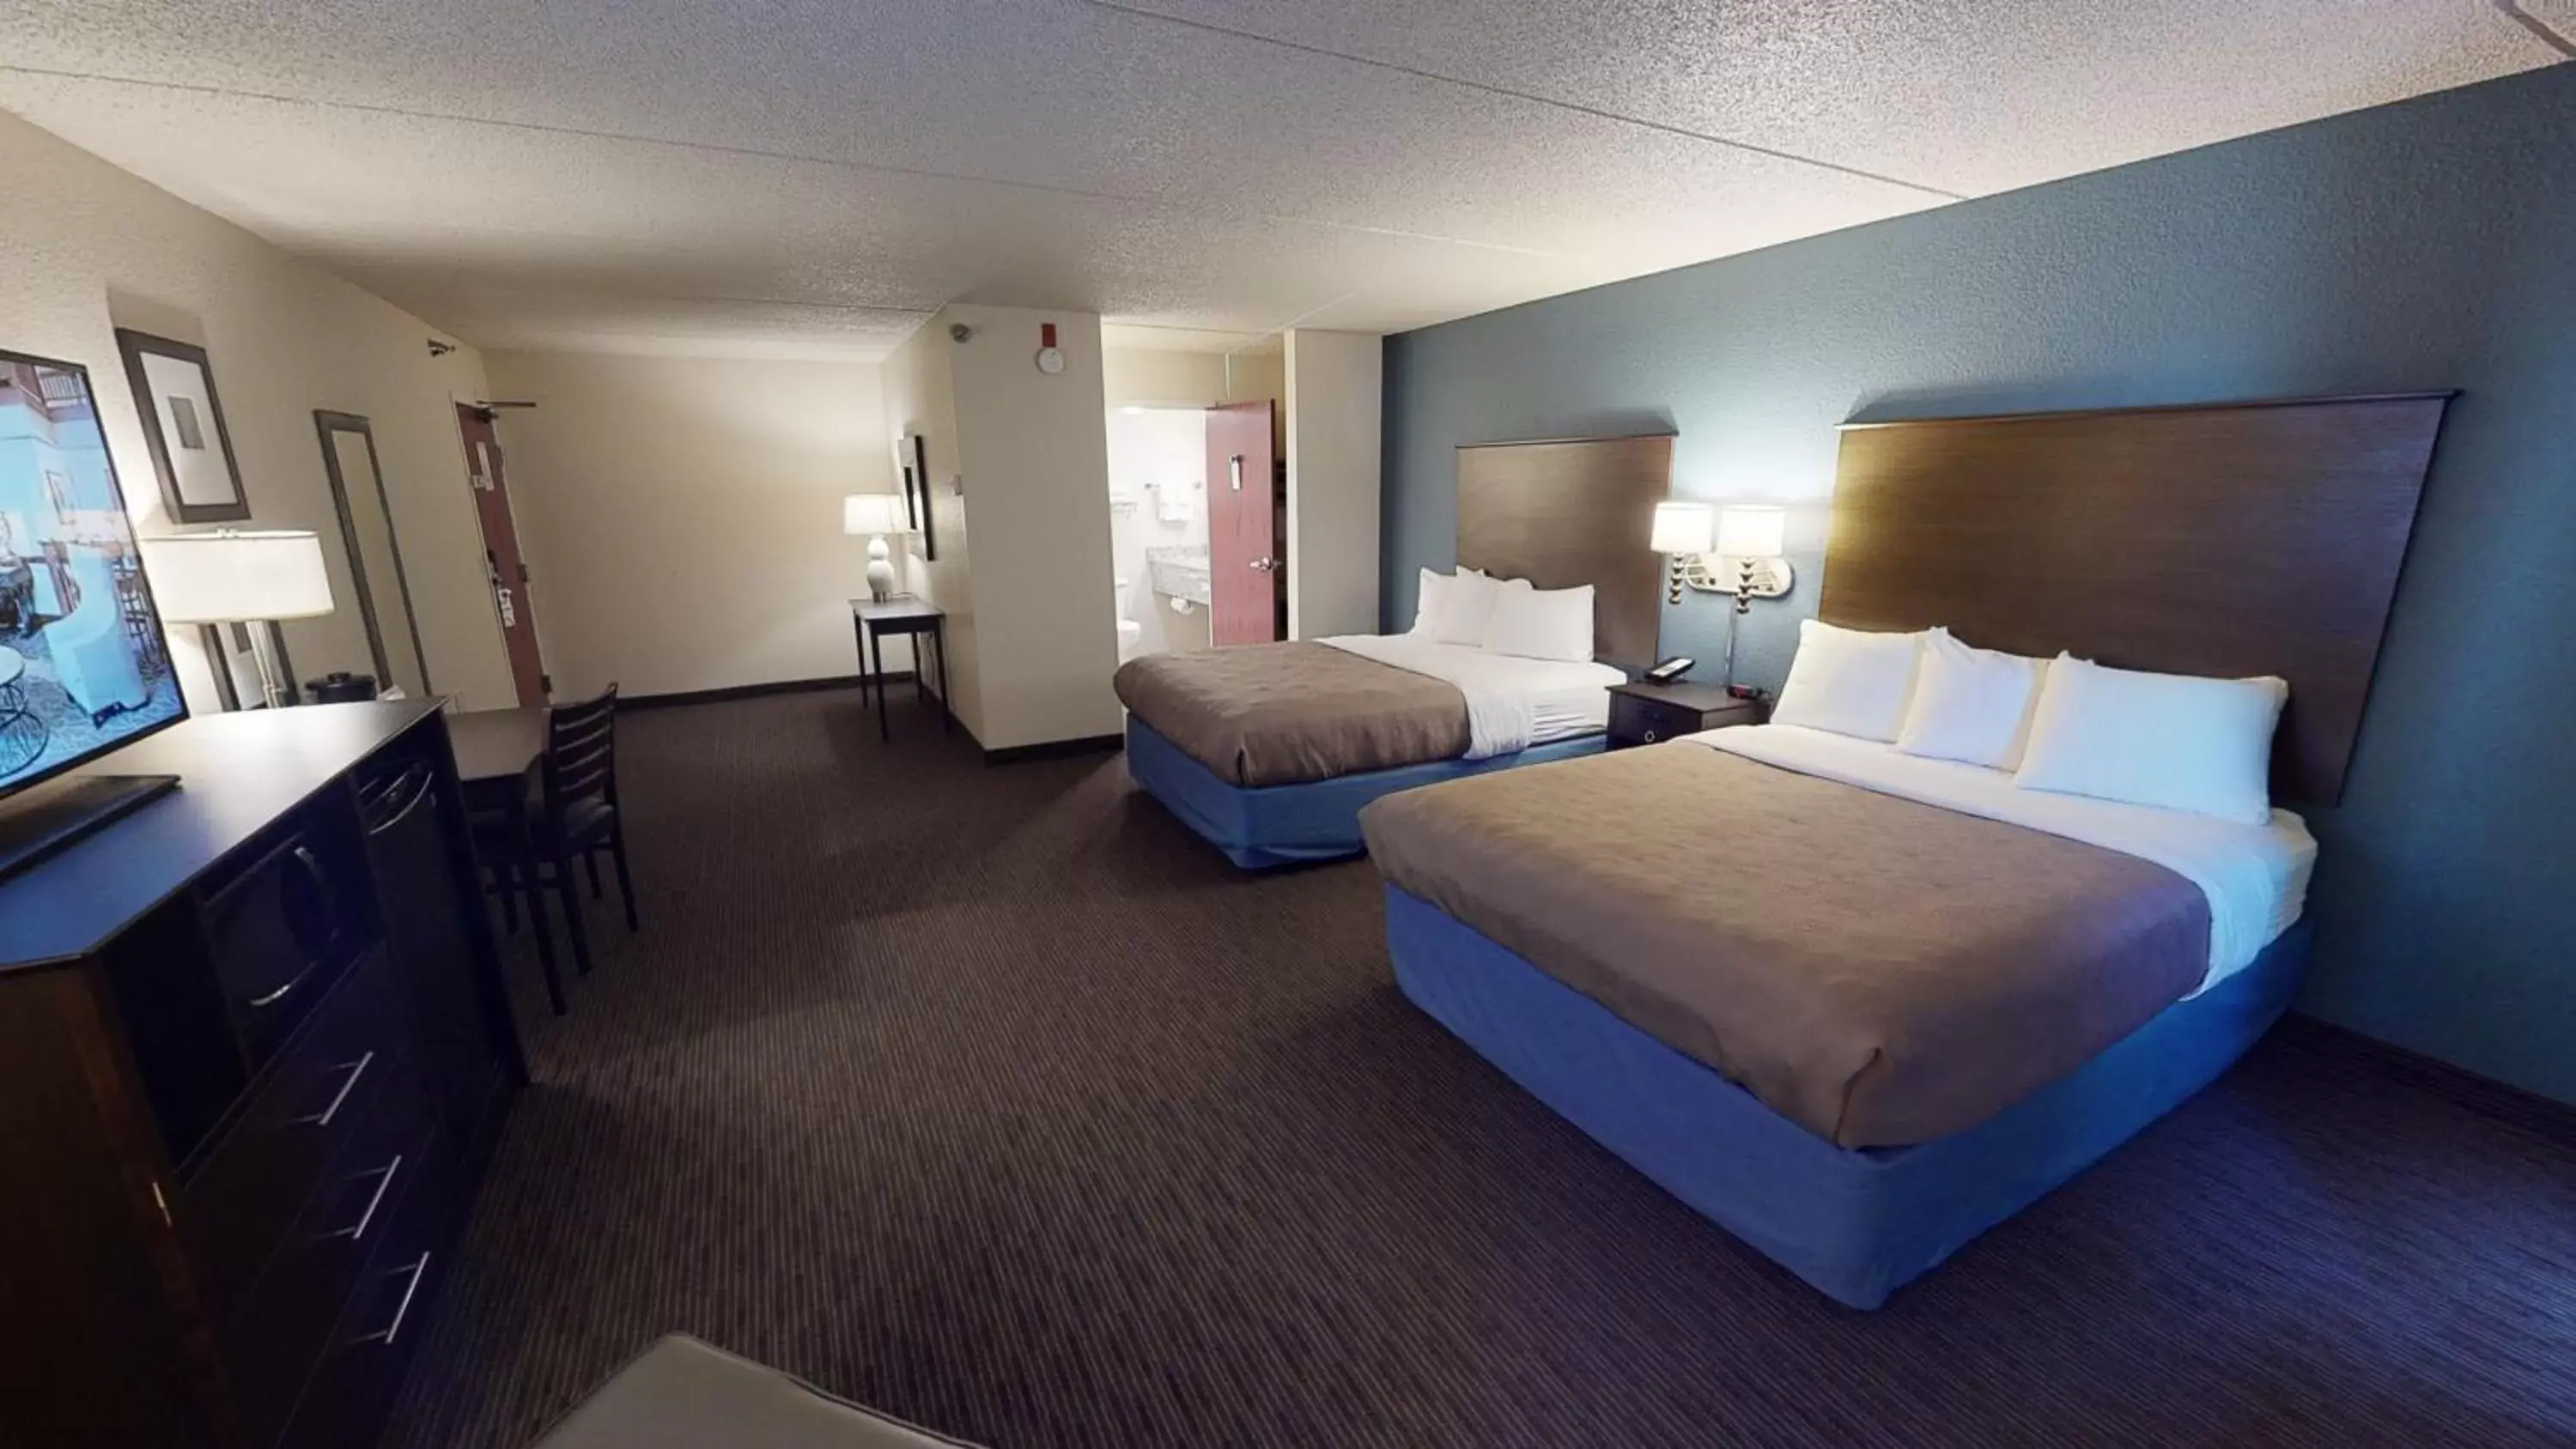 Bedroom in AmericInn by Wyndham Mounds View Minneapolis